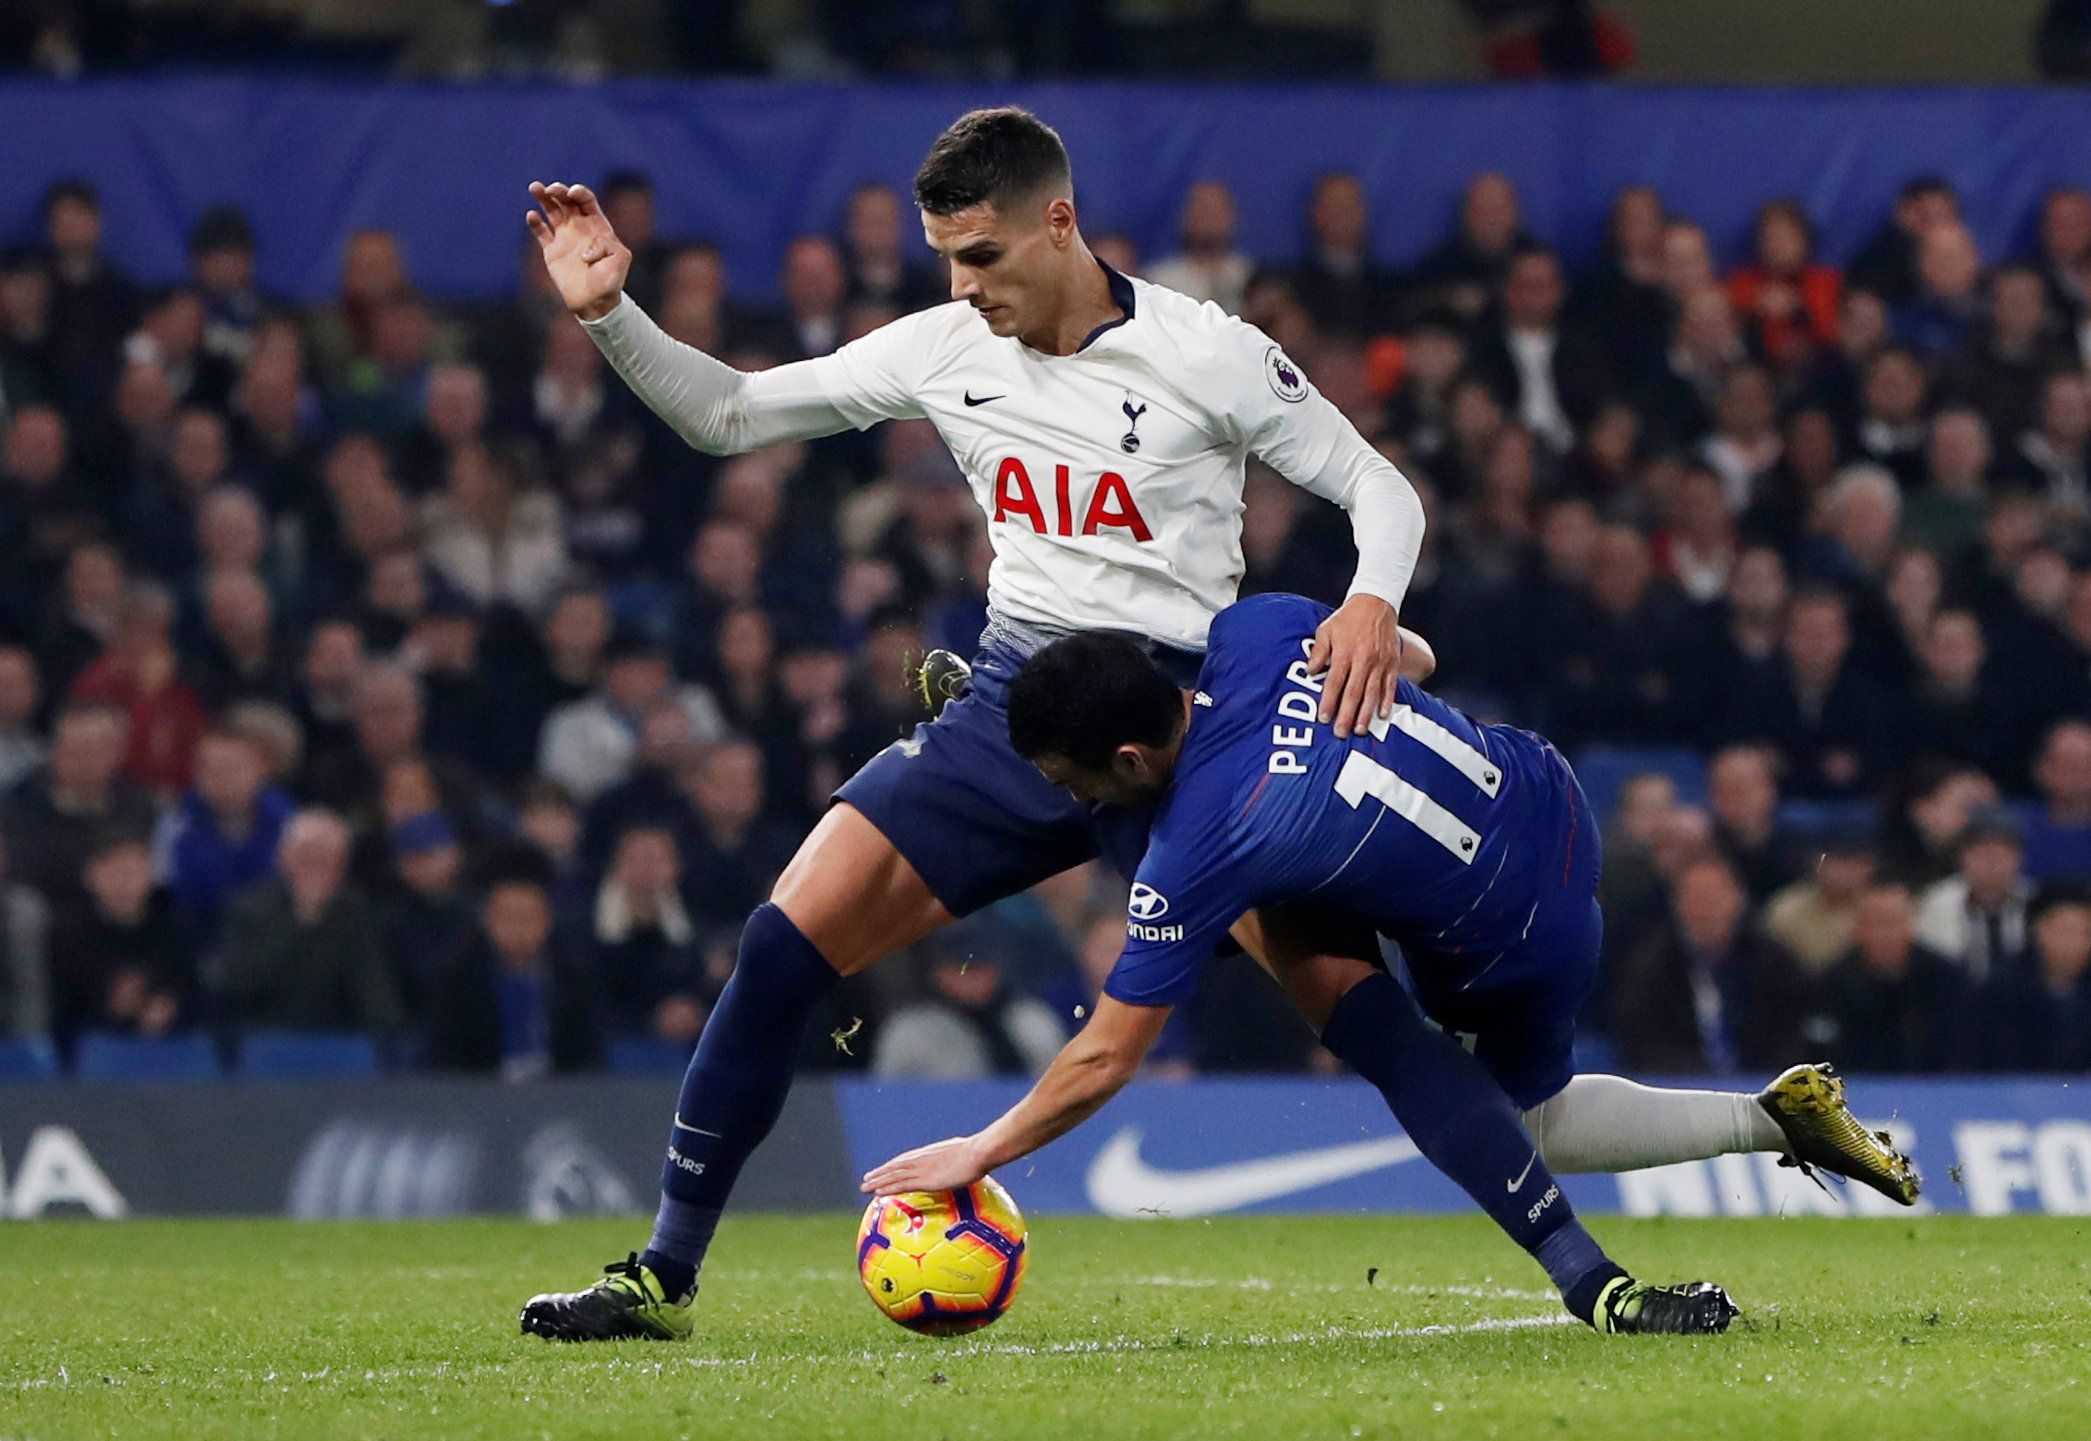 Soccer Football - Premier League - Chelsea v Tottenham Hotspur - Stamford Bridge, London, Britain - February 27, 2019  Tottenham's Erik Lamela in action with Chelsea's Pedro   Action Images via Reuters/Paul Childs  EDITORIAL USE ONLY. No use with unauthorized audio, video, data, fixture lists, club/league logos or 